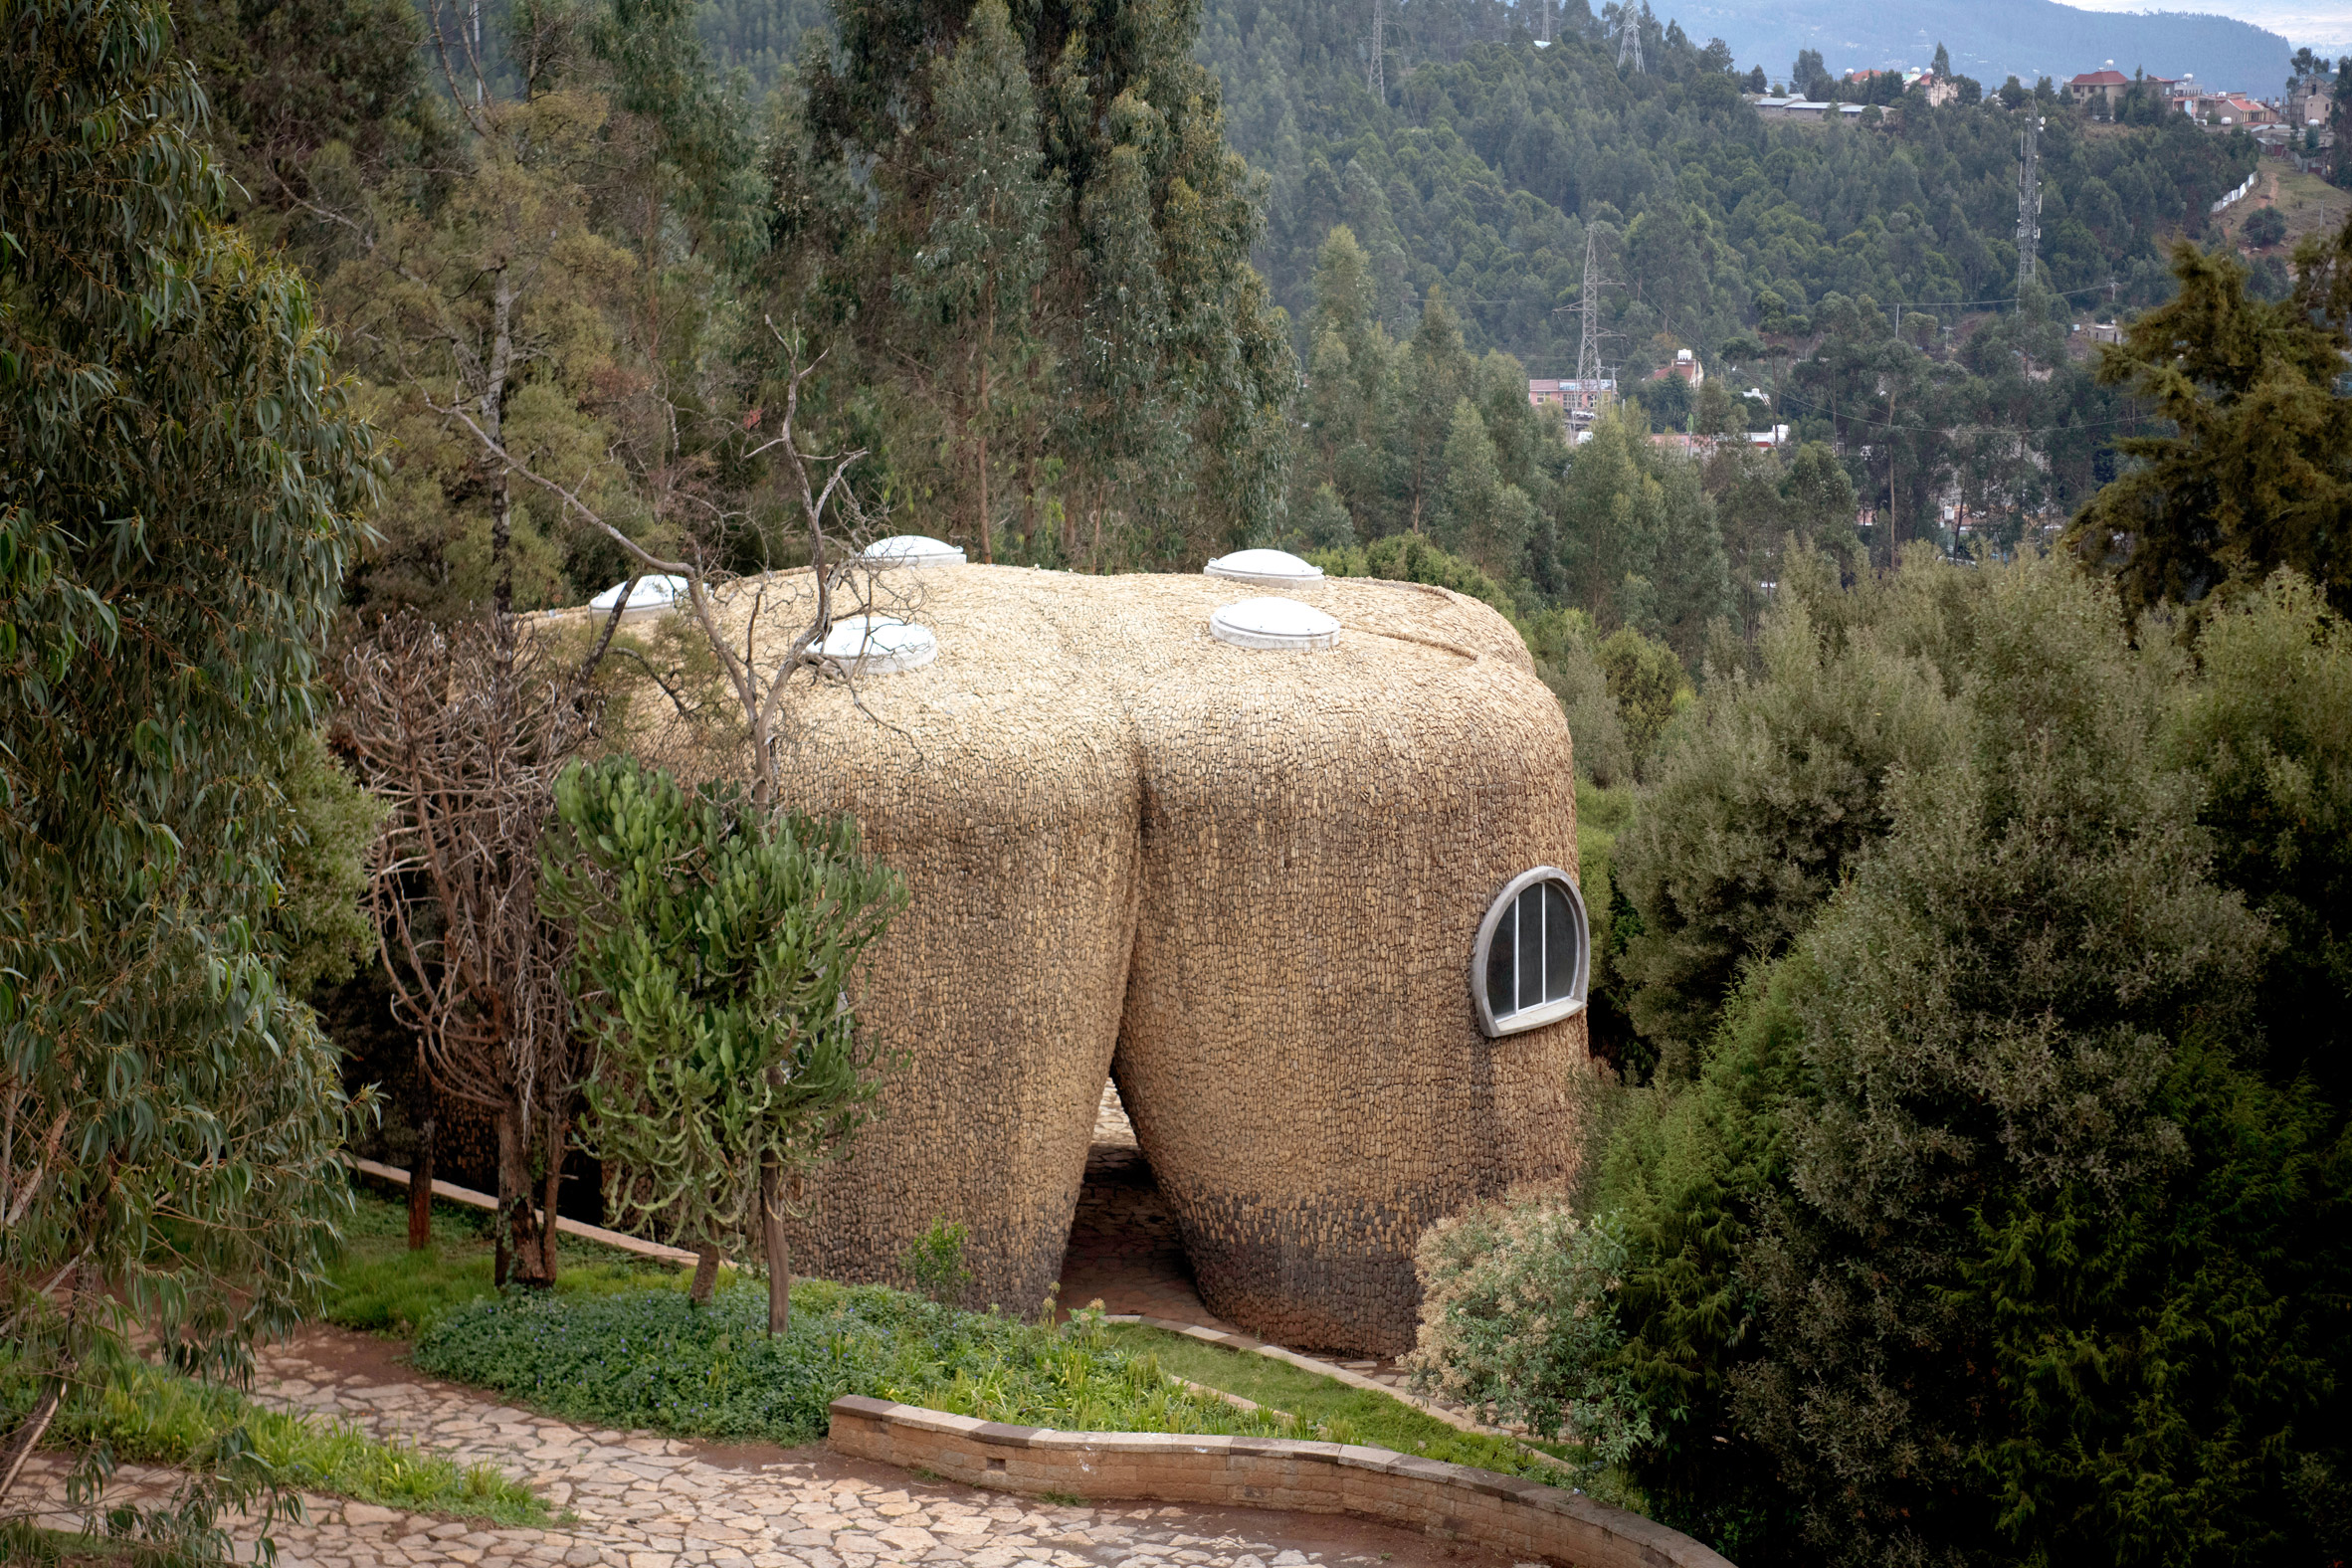 Stone research centre on a hillside at the Meles Zenawi Memorial Park by Studio Other Spaces